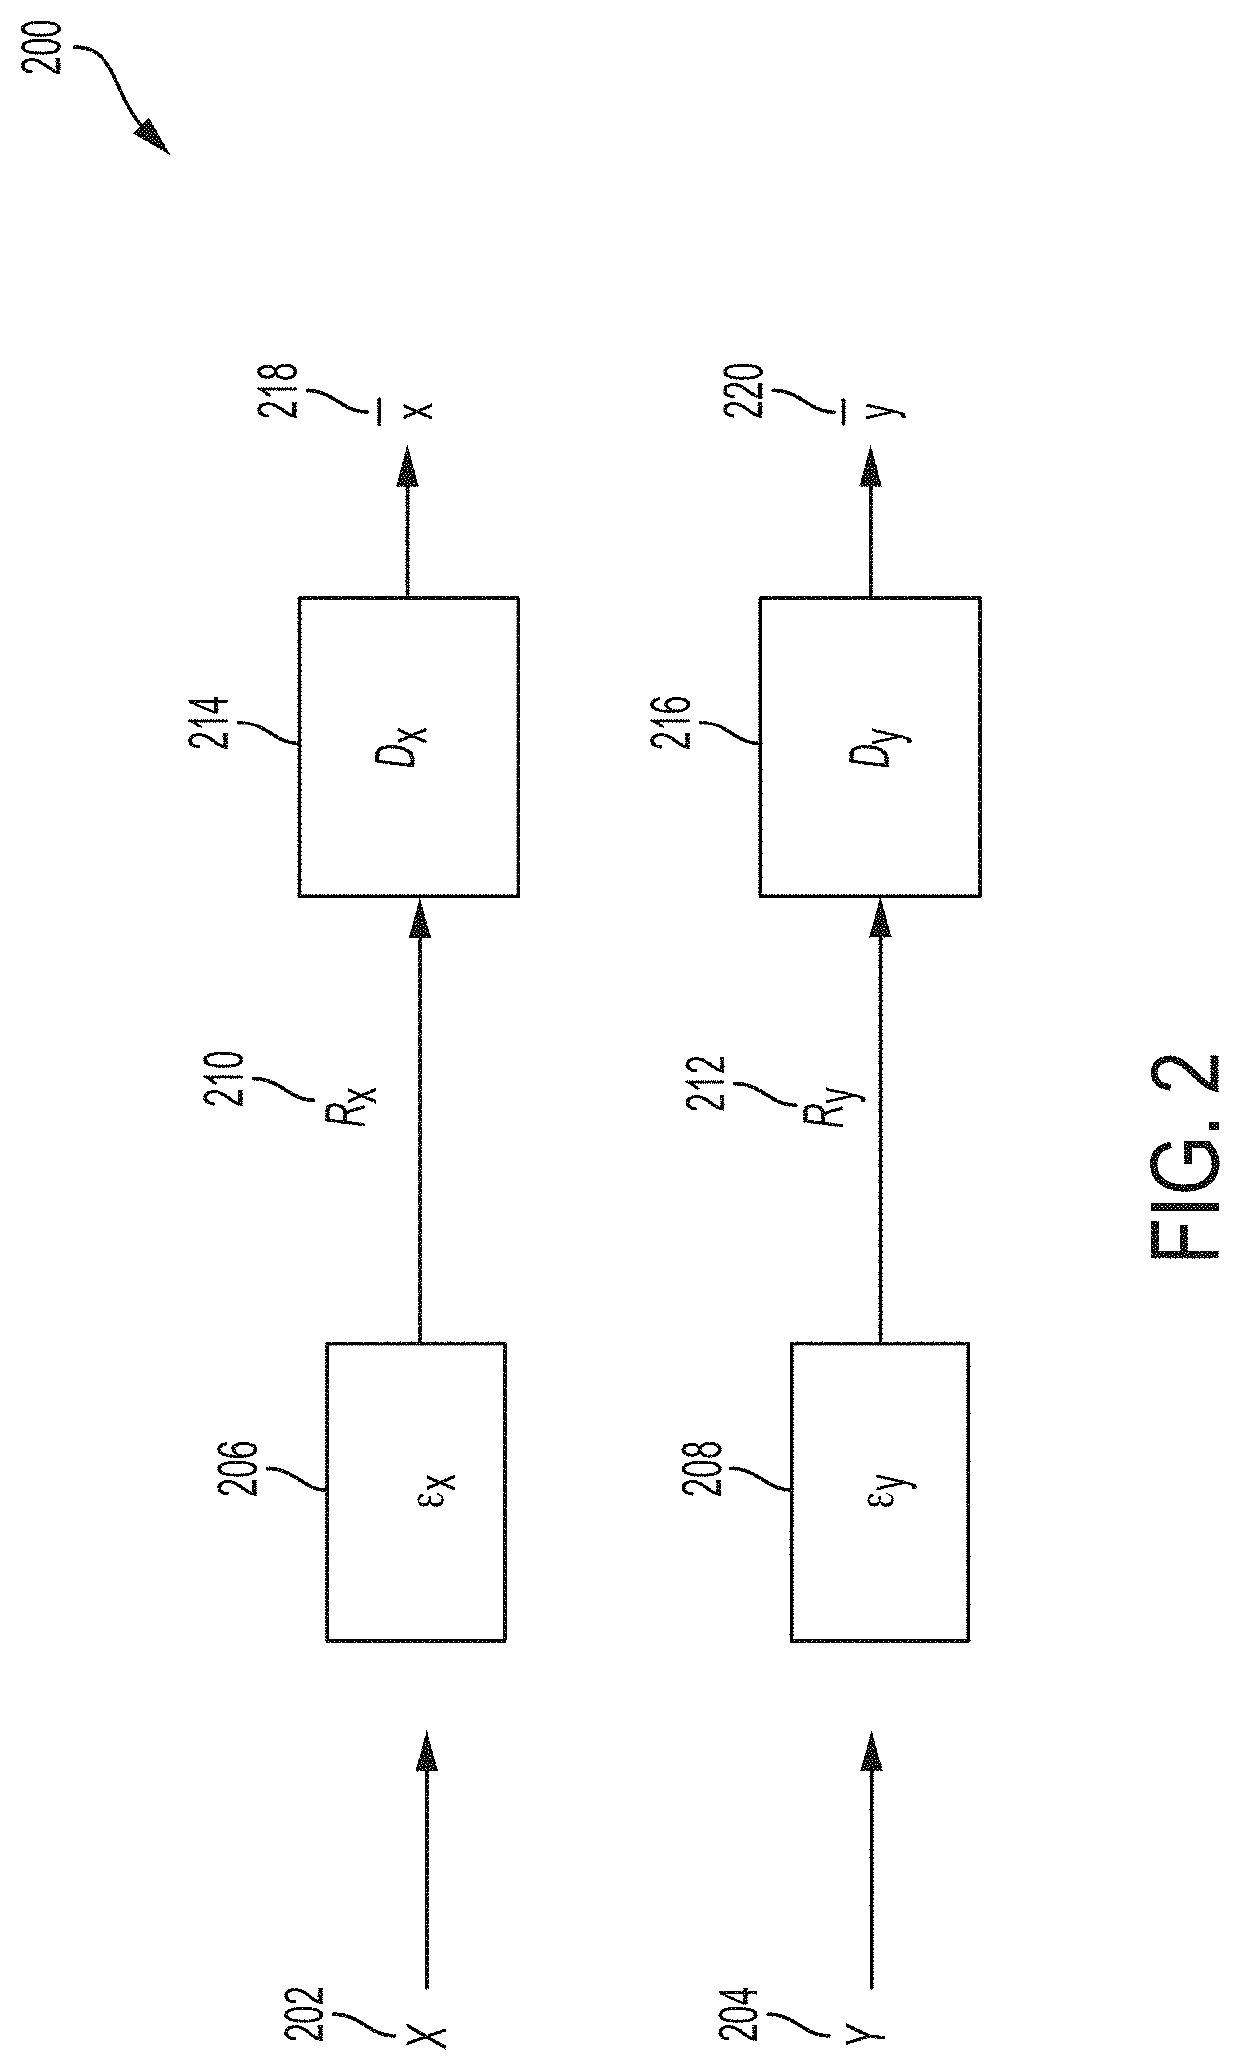 Systems and methods for distributed quantization of multimodal images